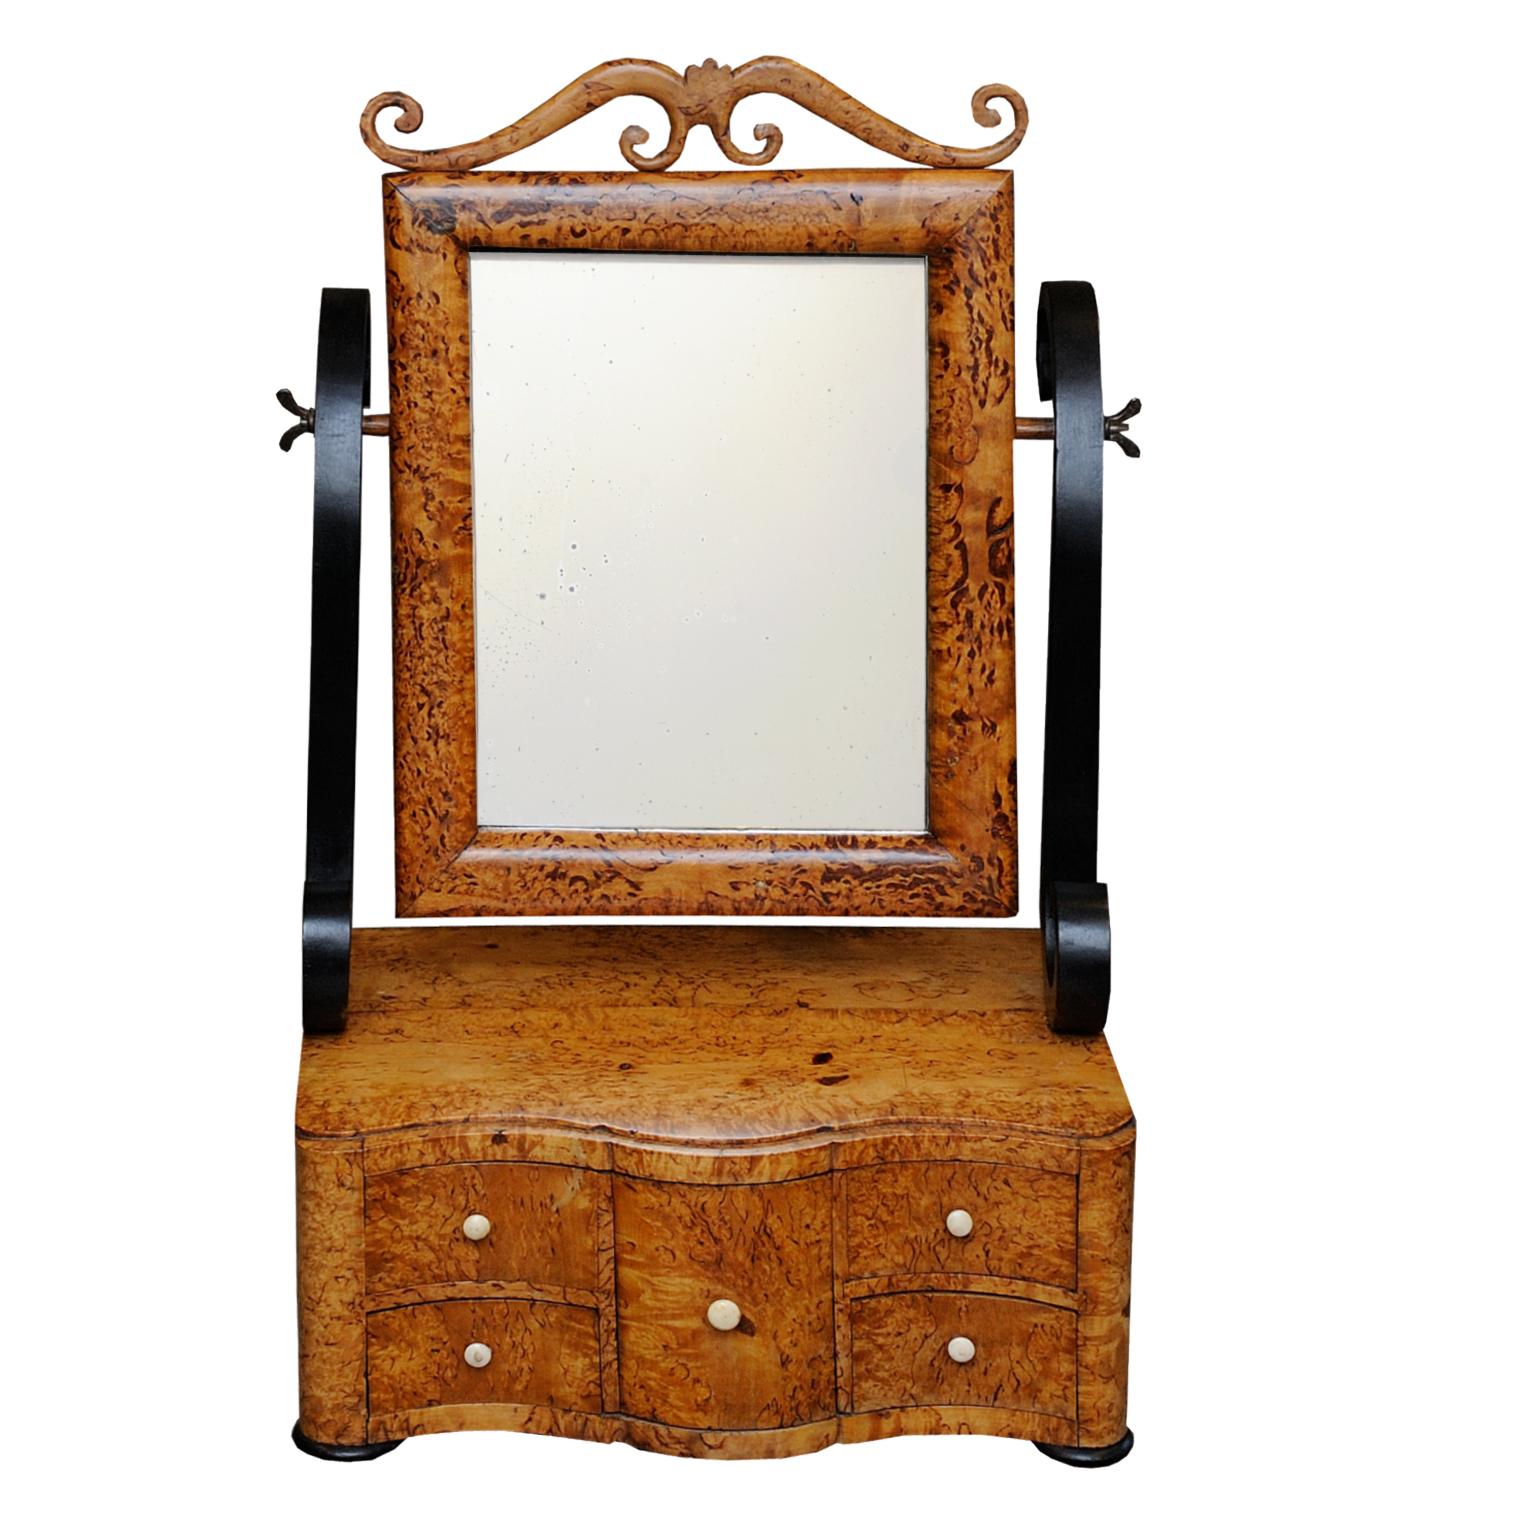 This is a rather beautiful Swedish Biedermeier toilet mirror, made in beautifully figured Karelian birch, with ebonized scrolling supports and original lightly foxed mirror plate. Standing on a wavy fronted suite of drawers, circa 1820.